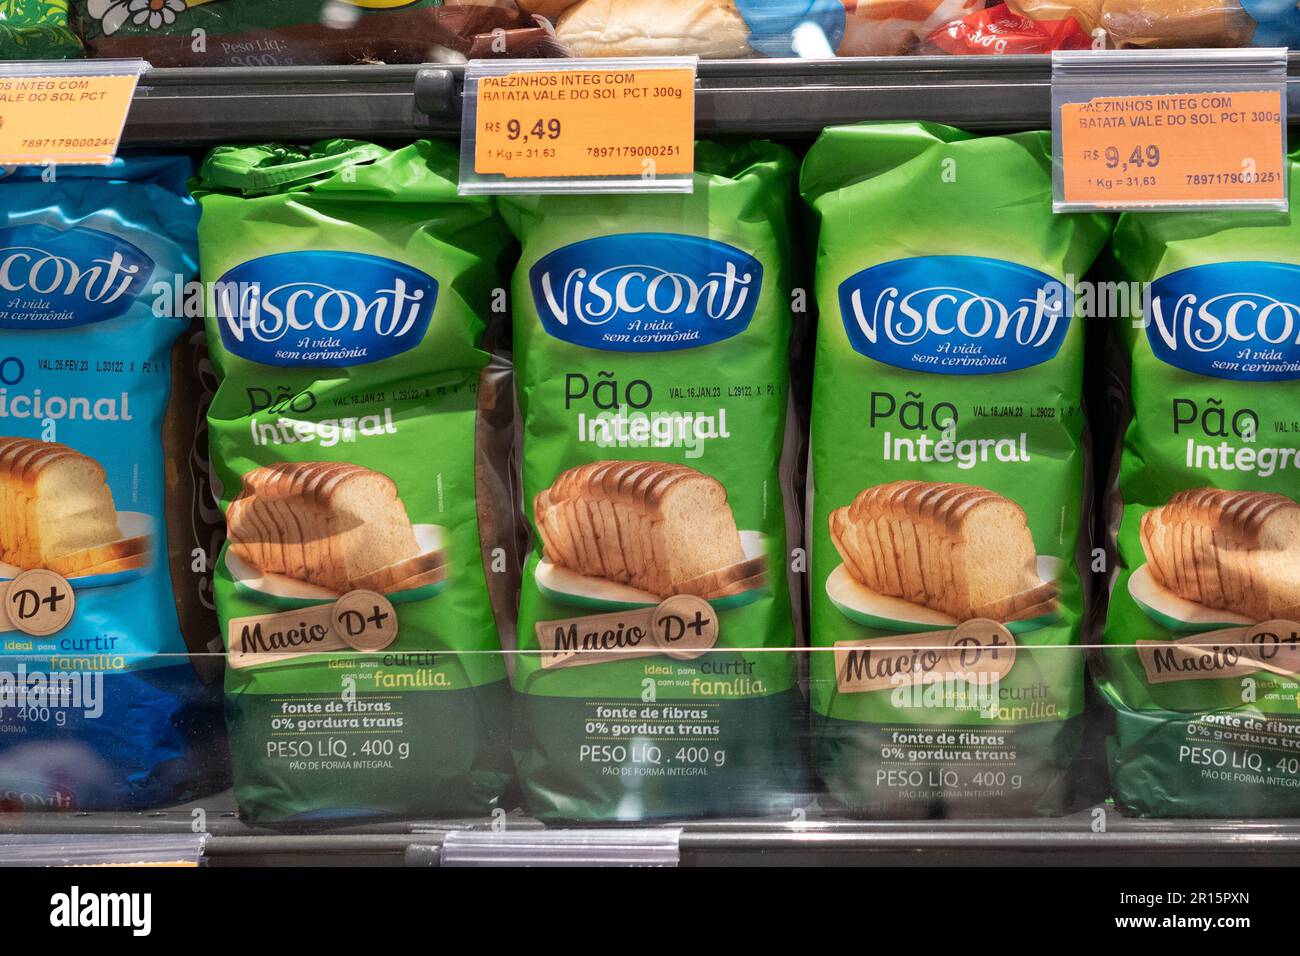 Petropolis, RJ, Brazil. 19 December 2023. Supermarket store shelf with visconti whole wheat bread, with price tags underneath of them Stock Photo